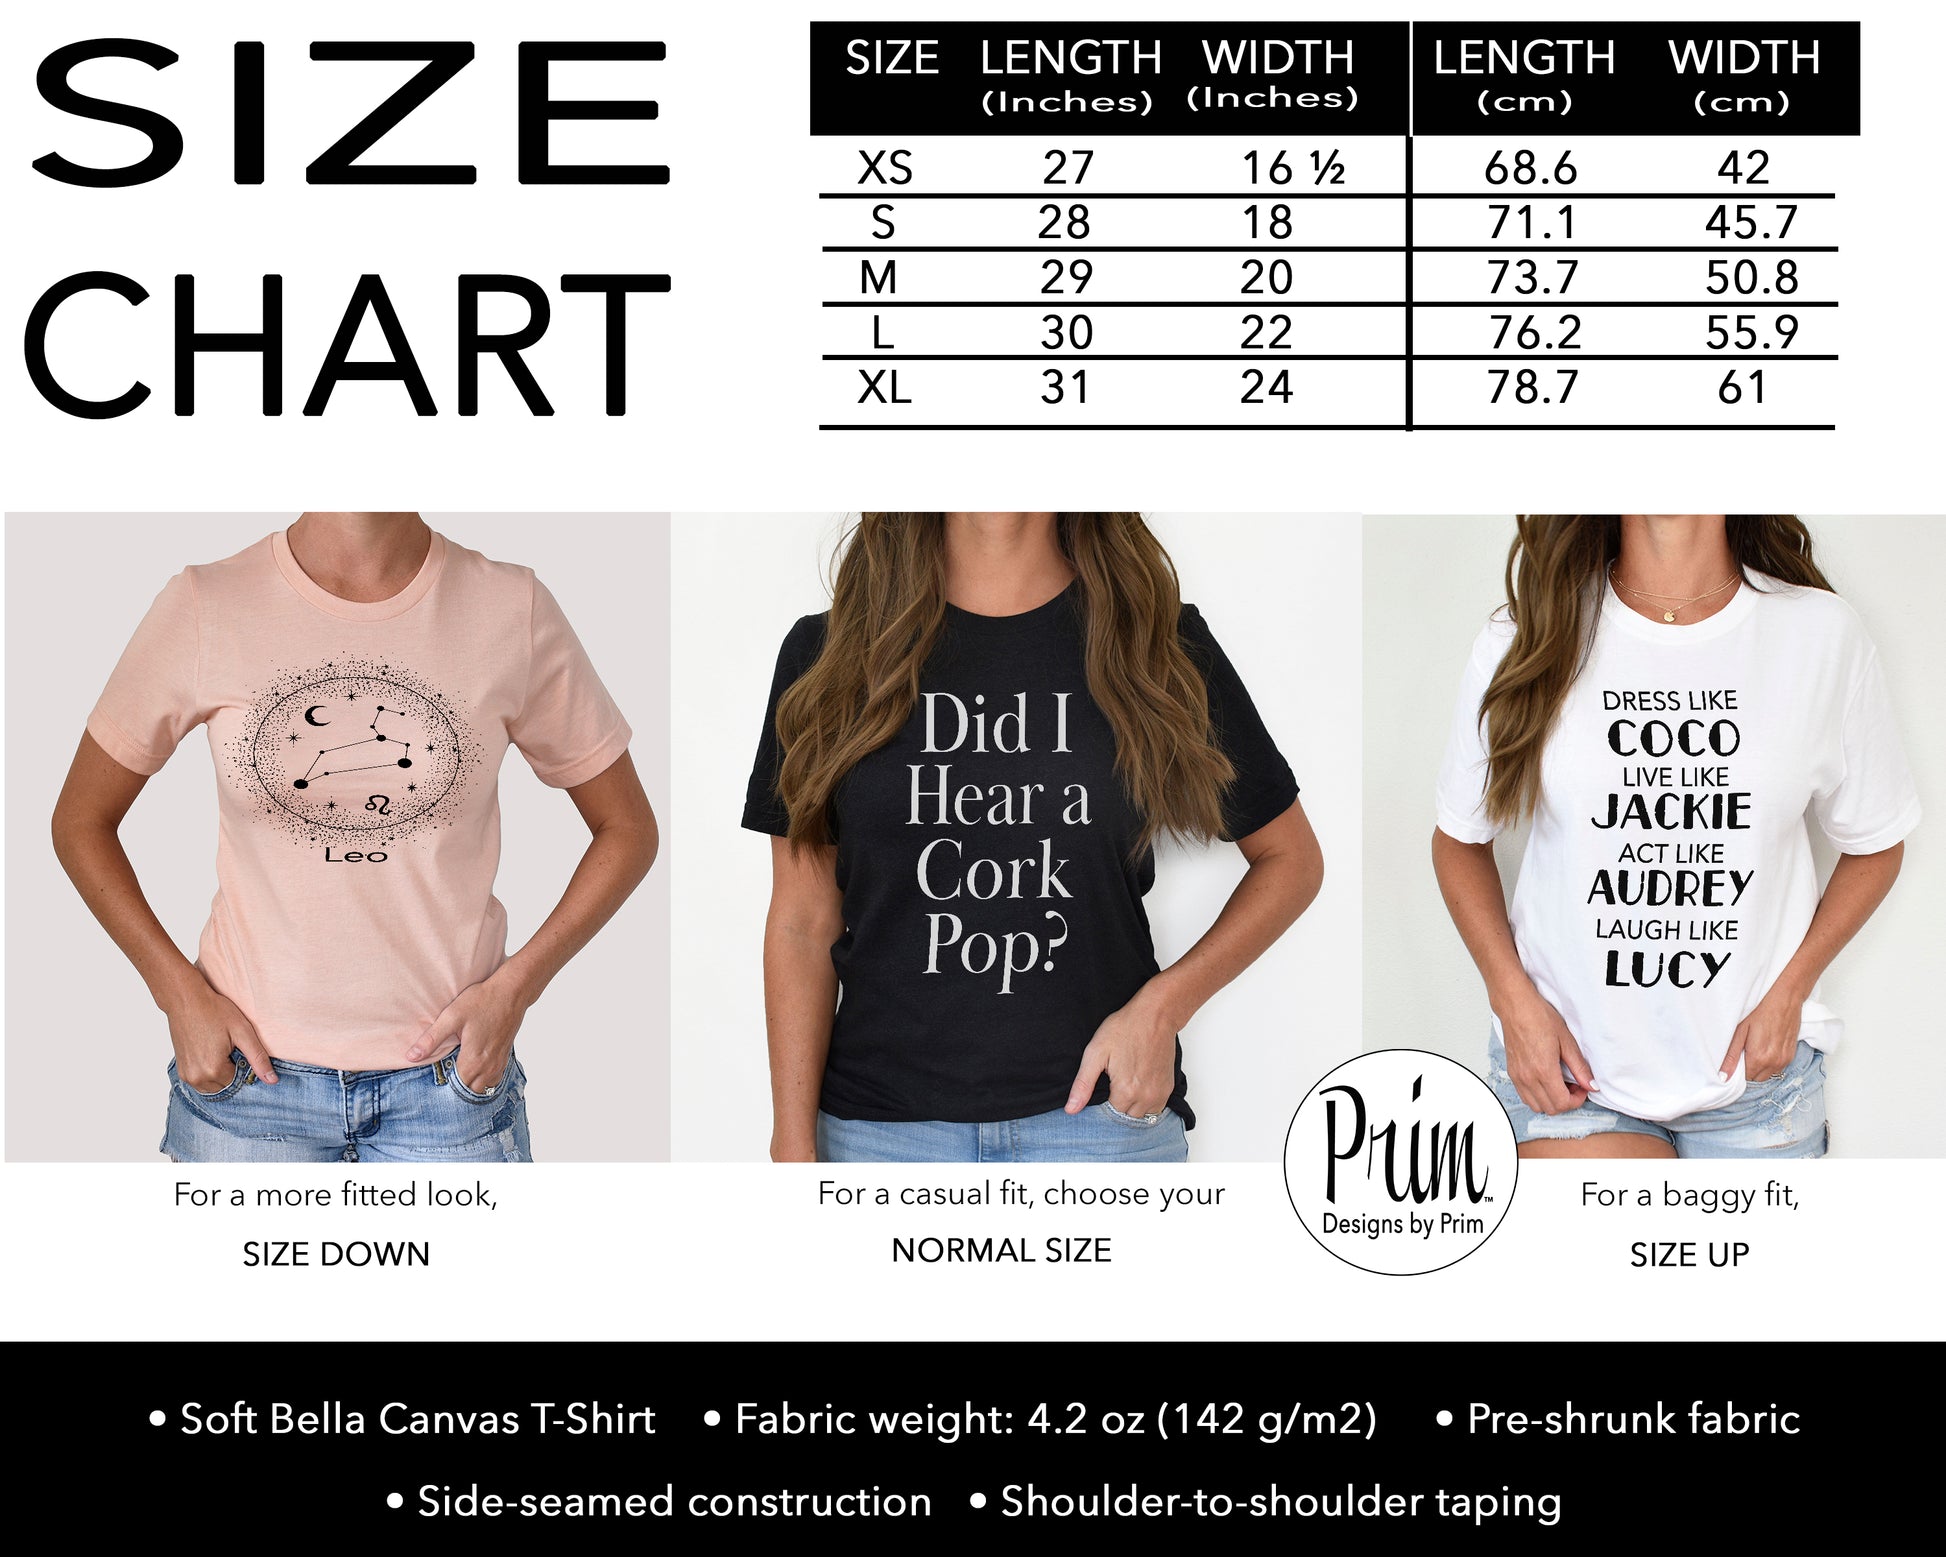 Designs by Prim Funny Graphic Shirts Size Chart